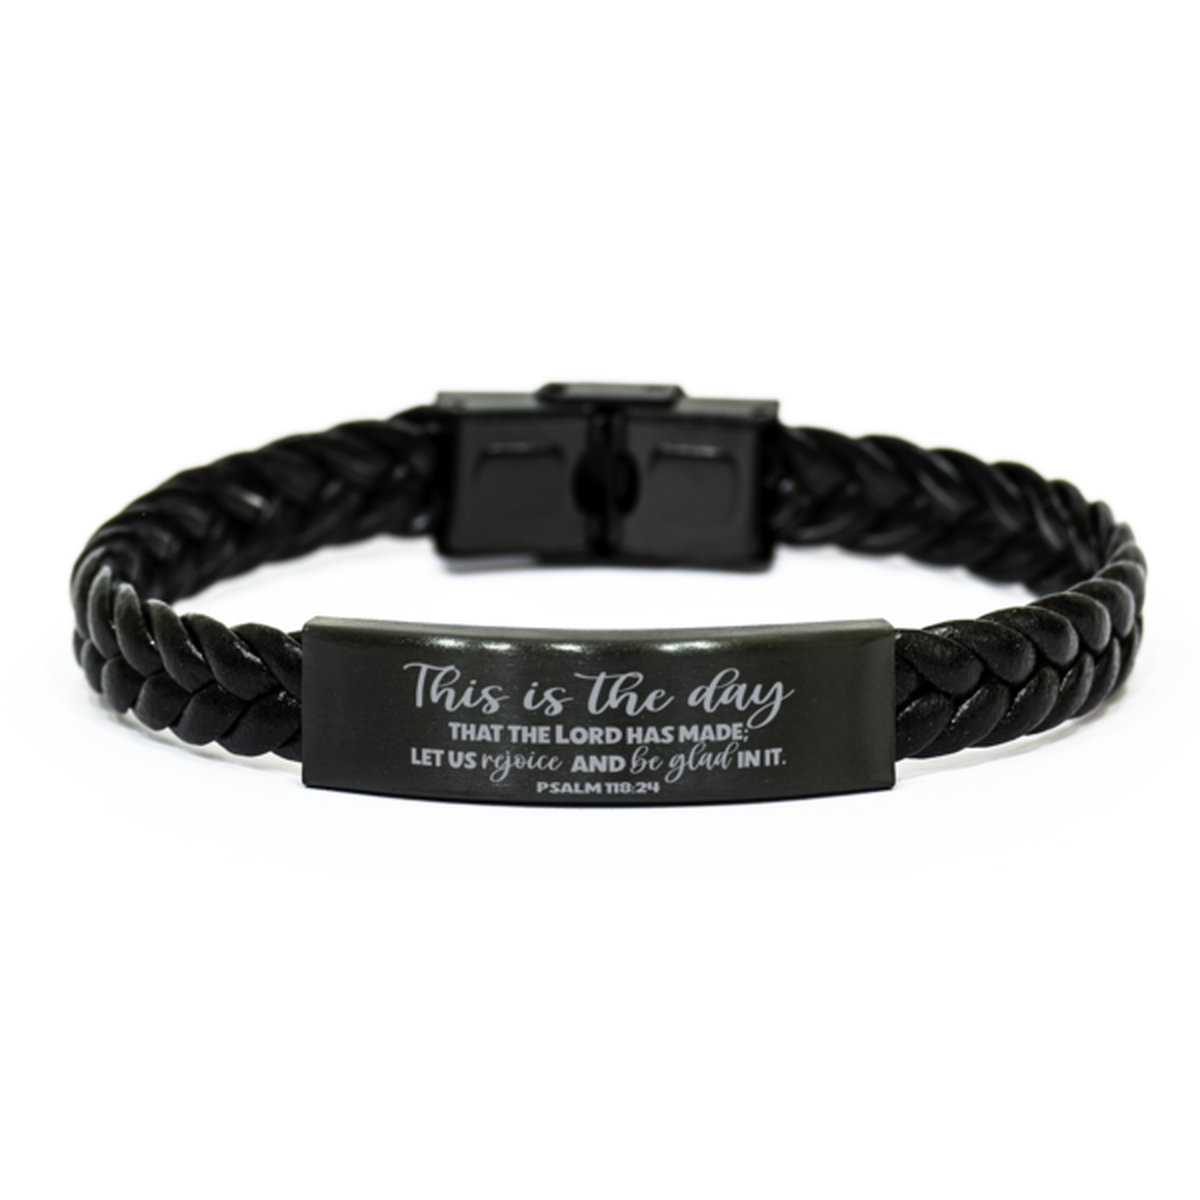 This is the Day that the Lord Has Made, Psalm 118:24, Engraved Bible Verse Bracelet, Scripture Christian Gift, Braided Leather Bracelet